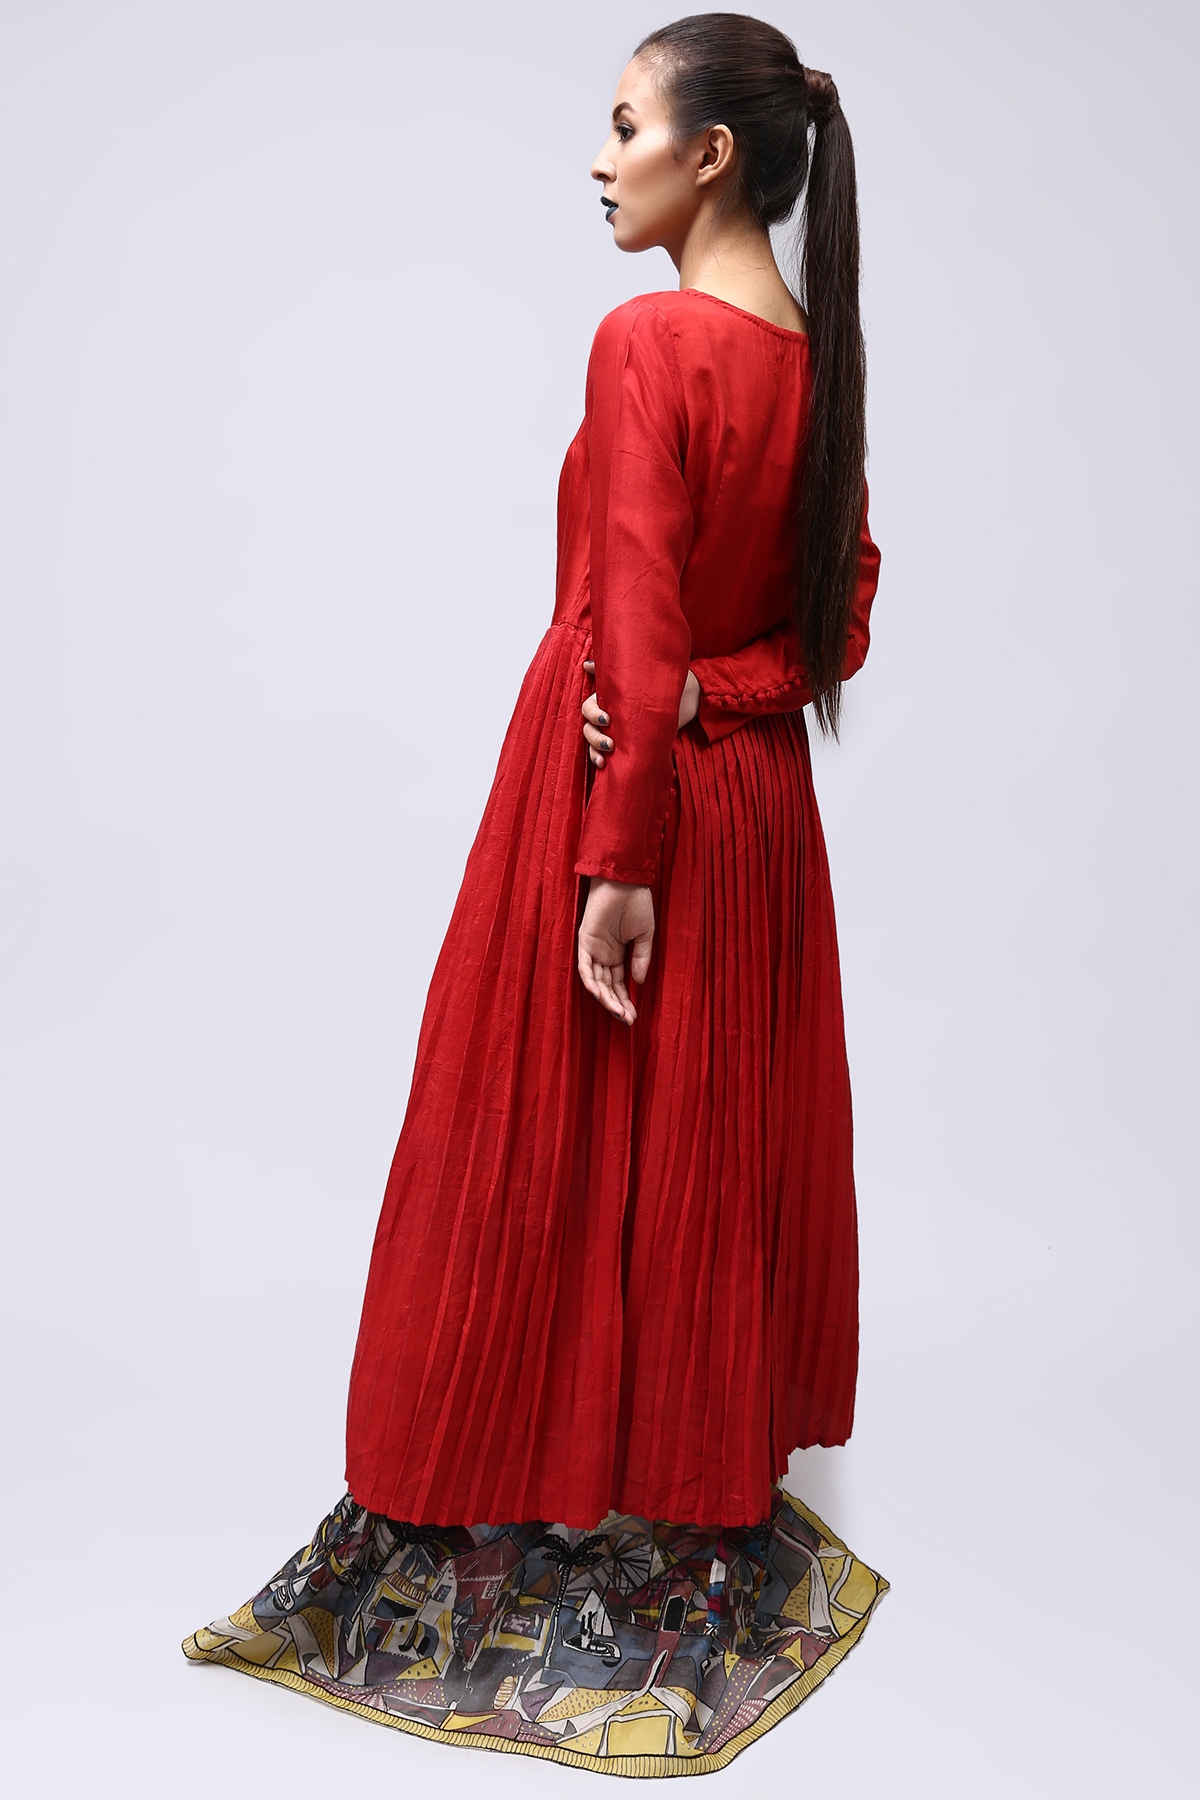 Silk and organza red long pret by Generation party dresses 2019